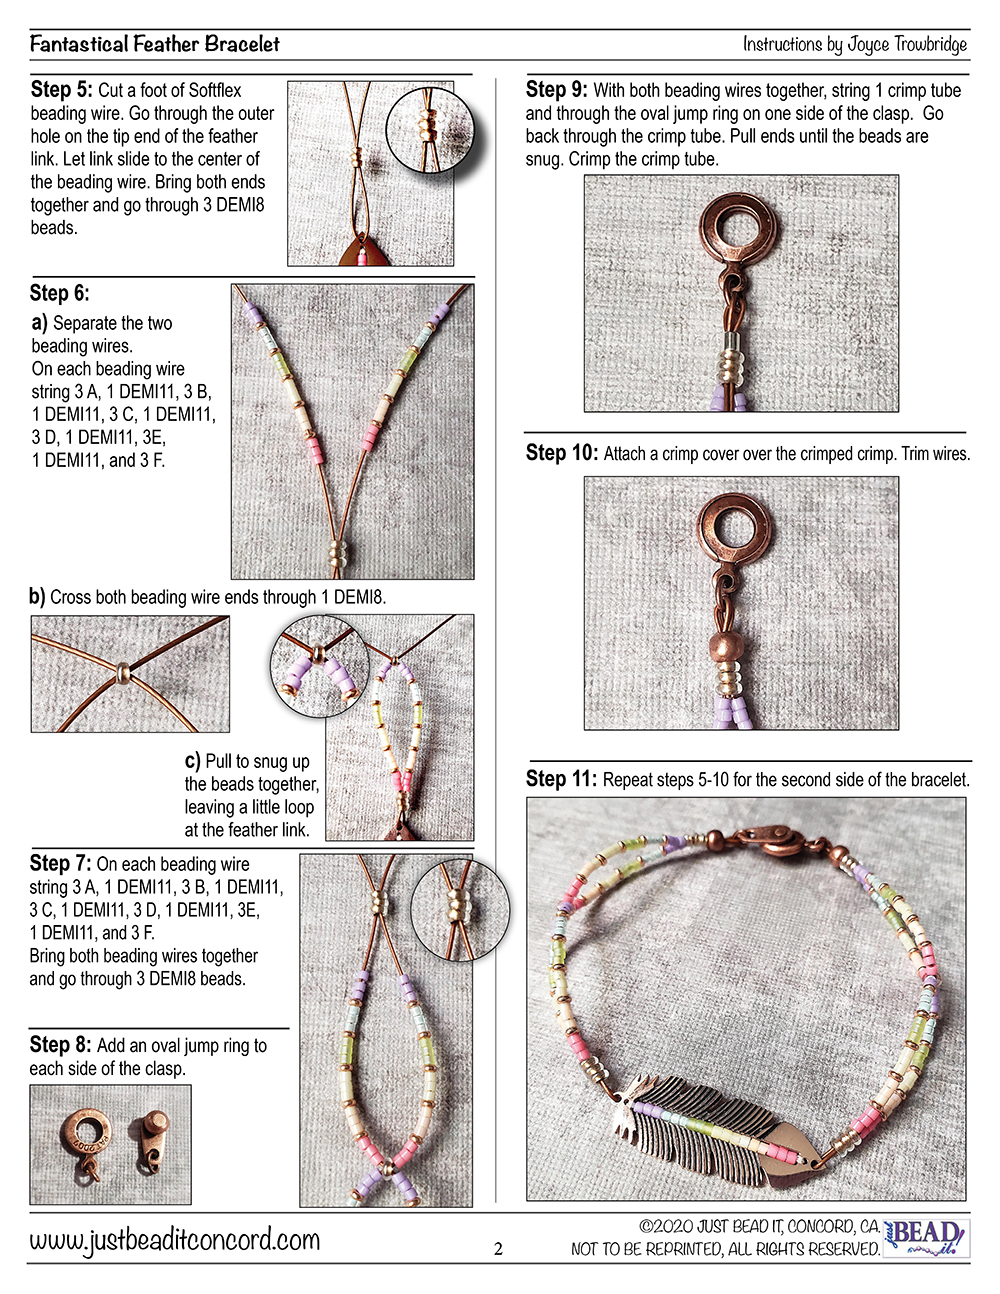 Fantastical Feather Bracelet Instructions by Just Bead It